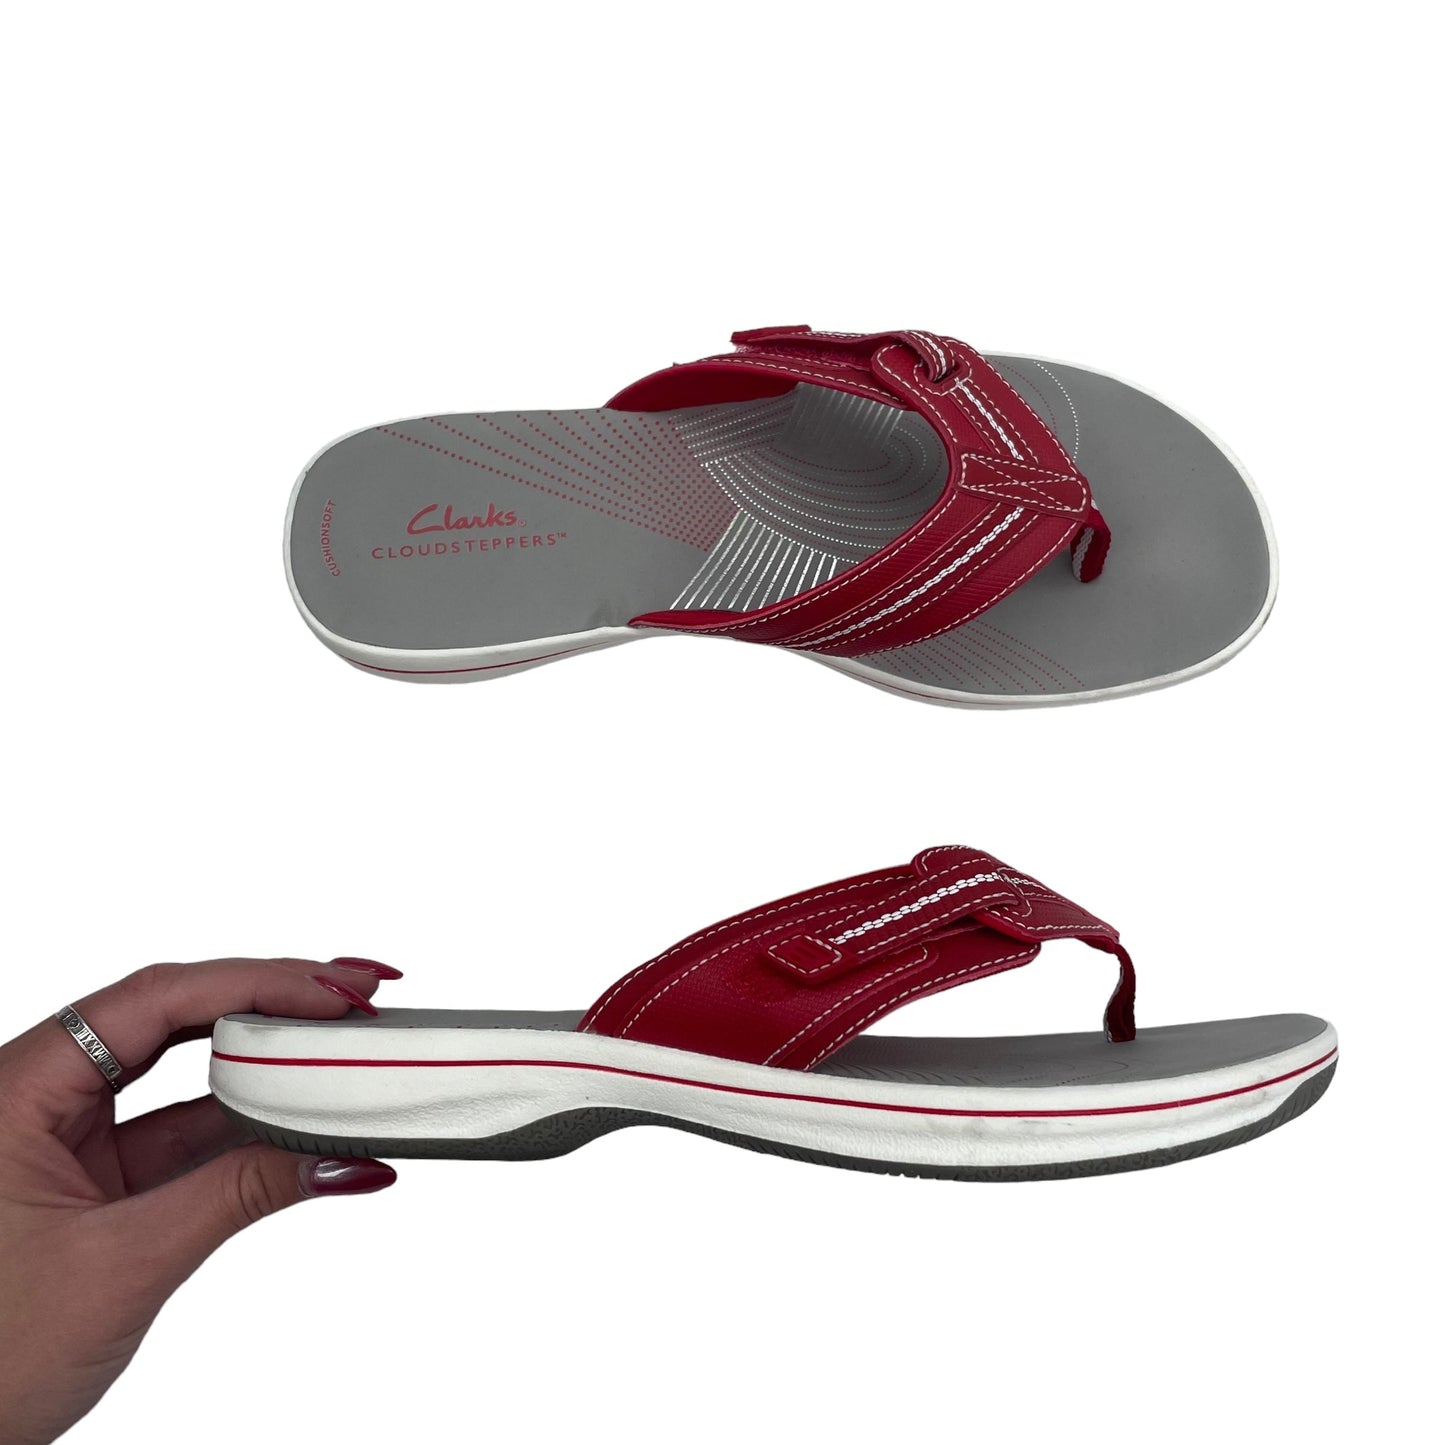 RED CLARKS SANDALS FLATS, Size 9